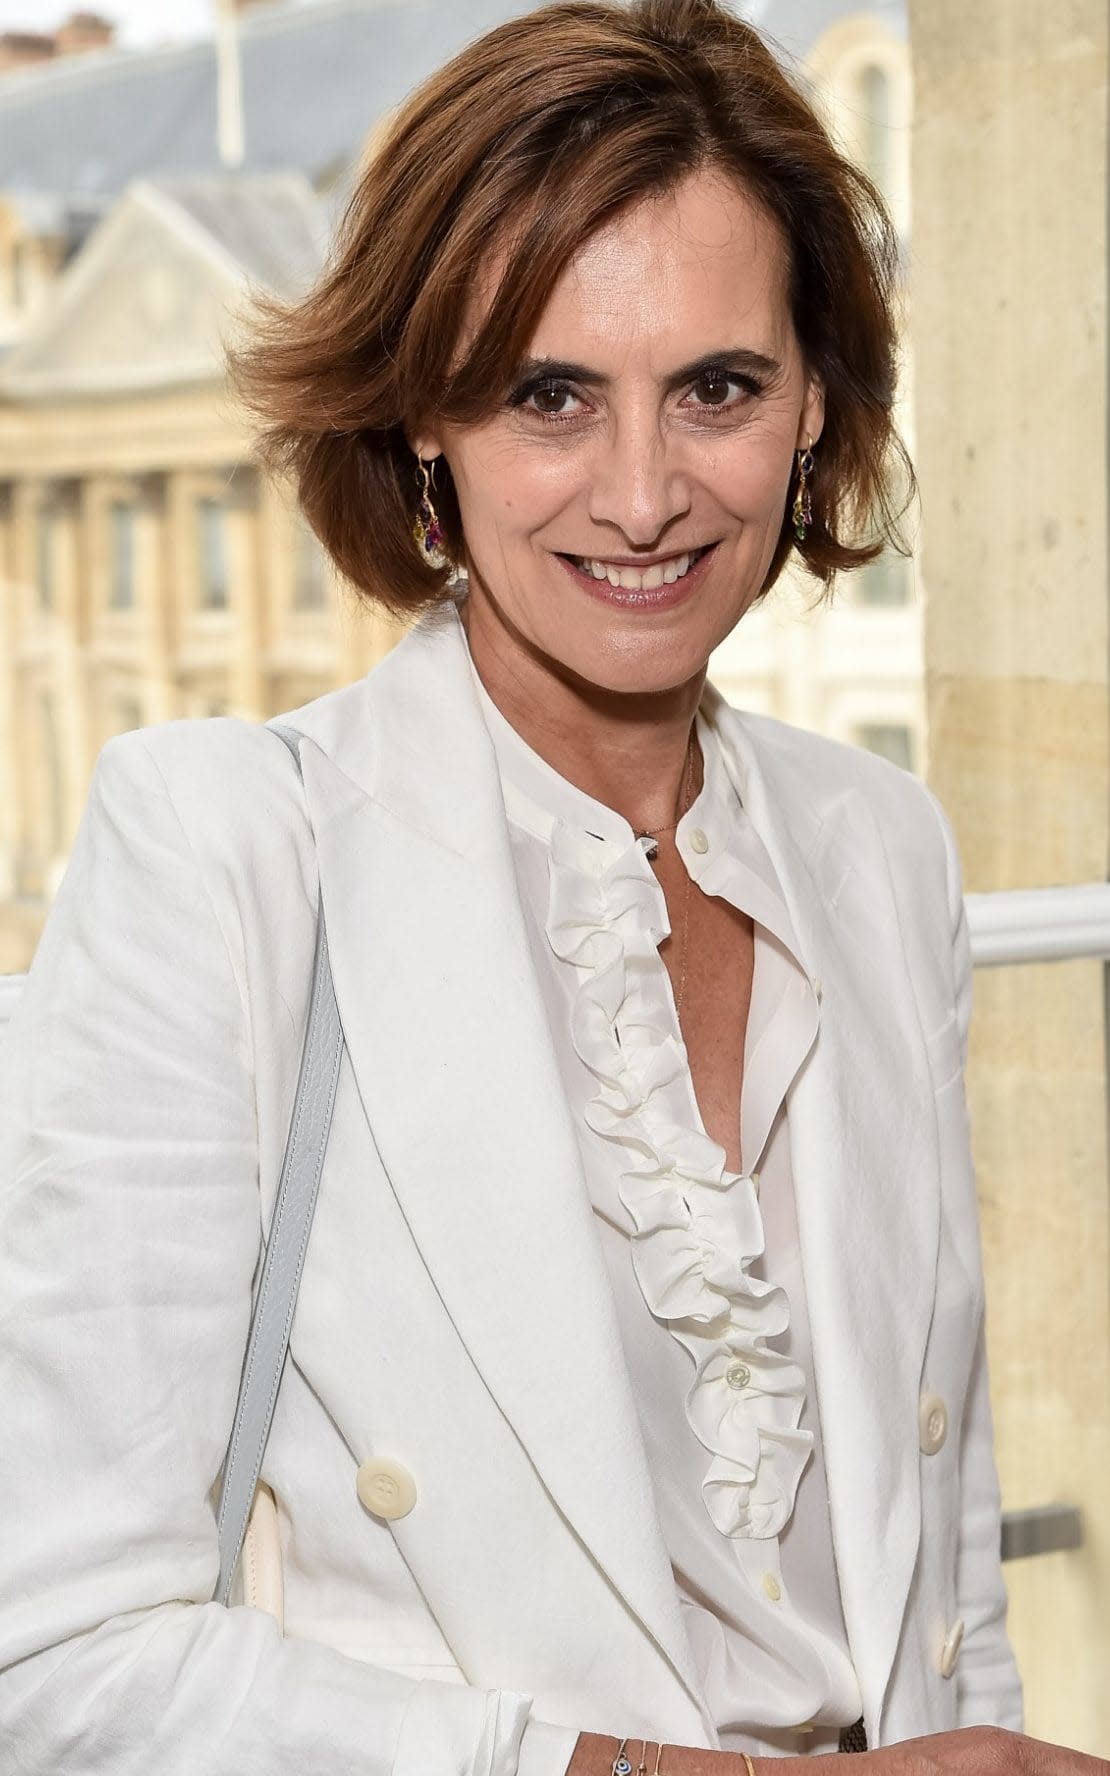 French model Ines De La Fressange is renowned for her effortless beauty and glowing skin. - Corbis Entertainment